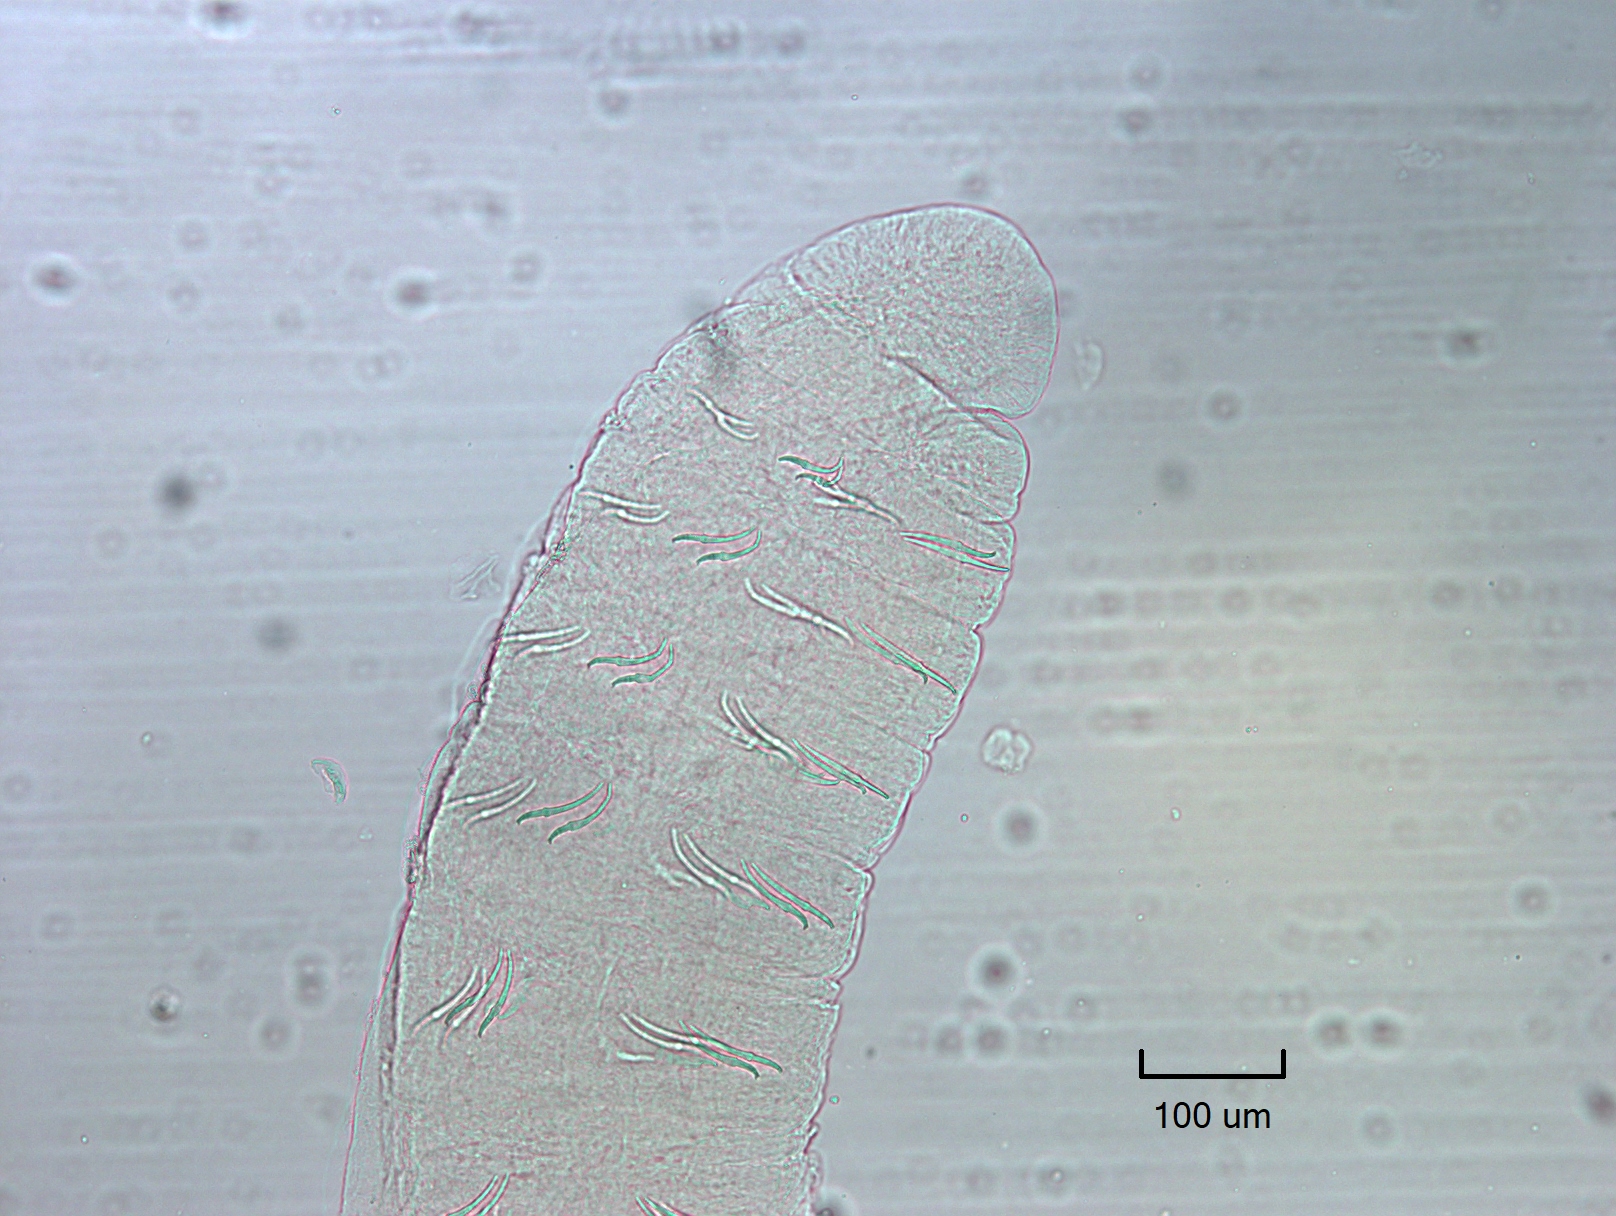 photomicrograph showing the front end of a worm with sets of two chaetae in each bundle